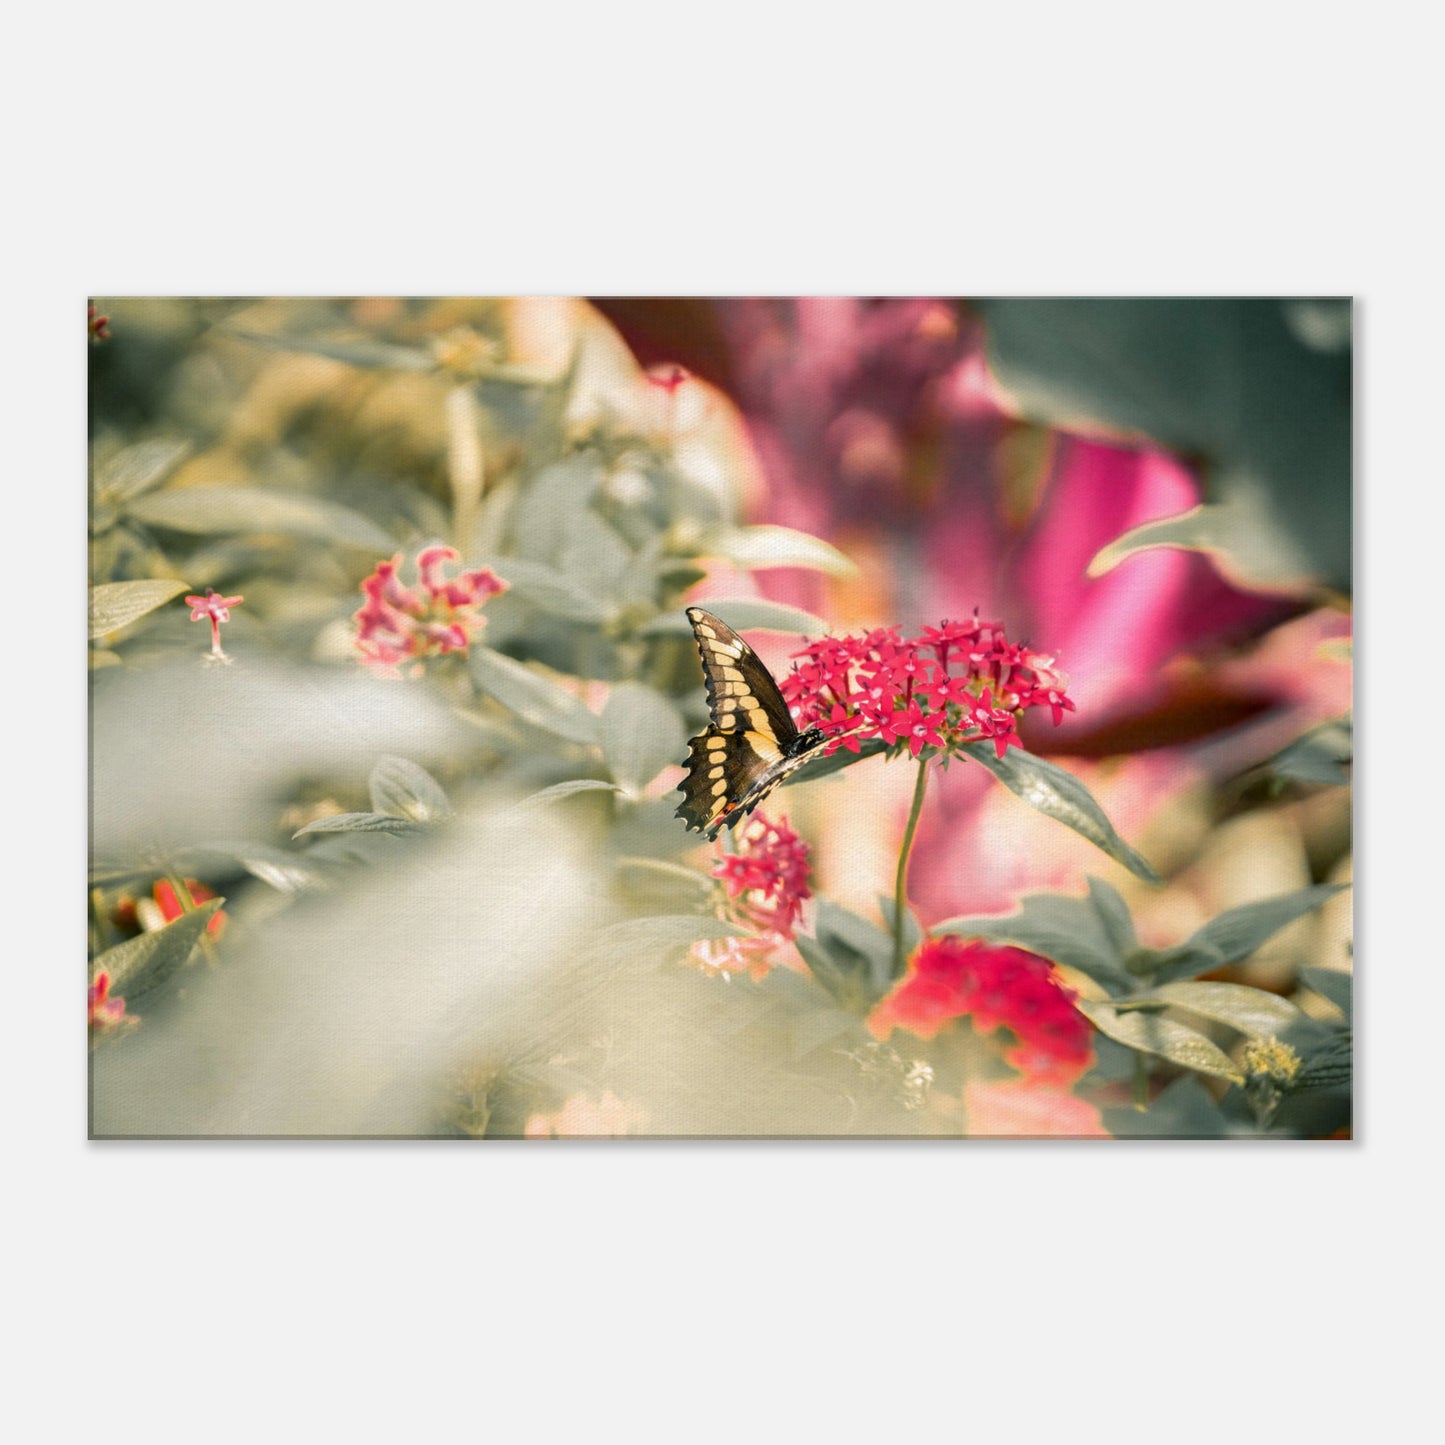 Butterfly Garden (Gallery-Wrapped Canvas)